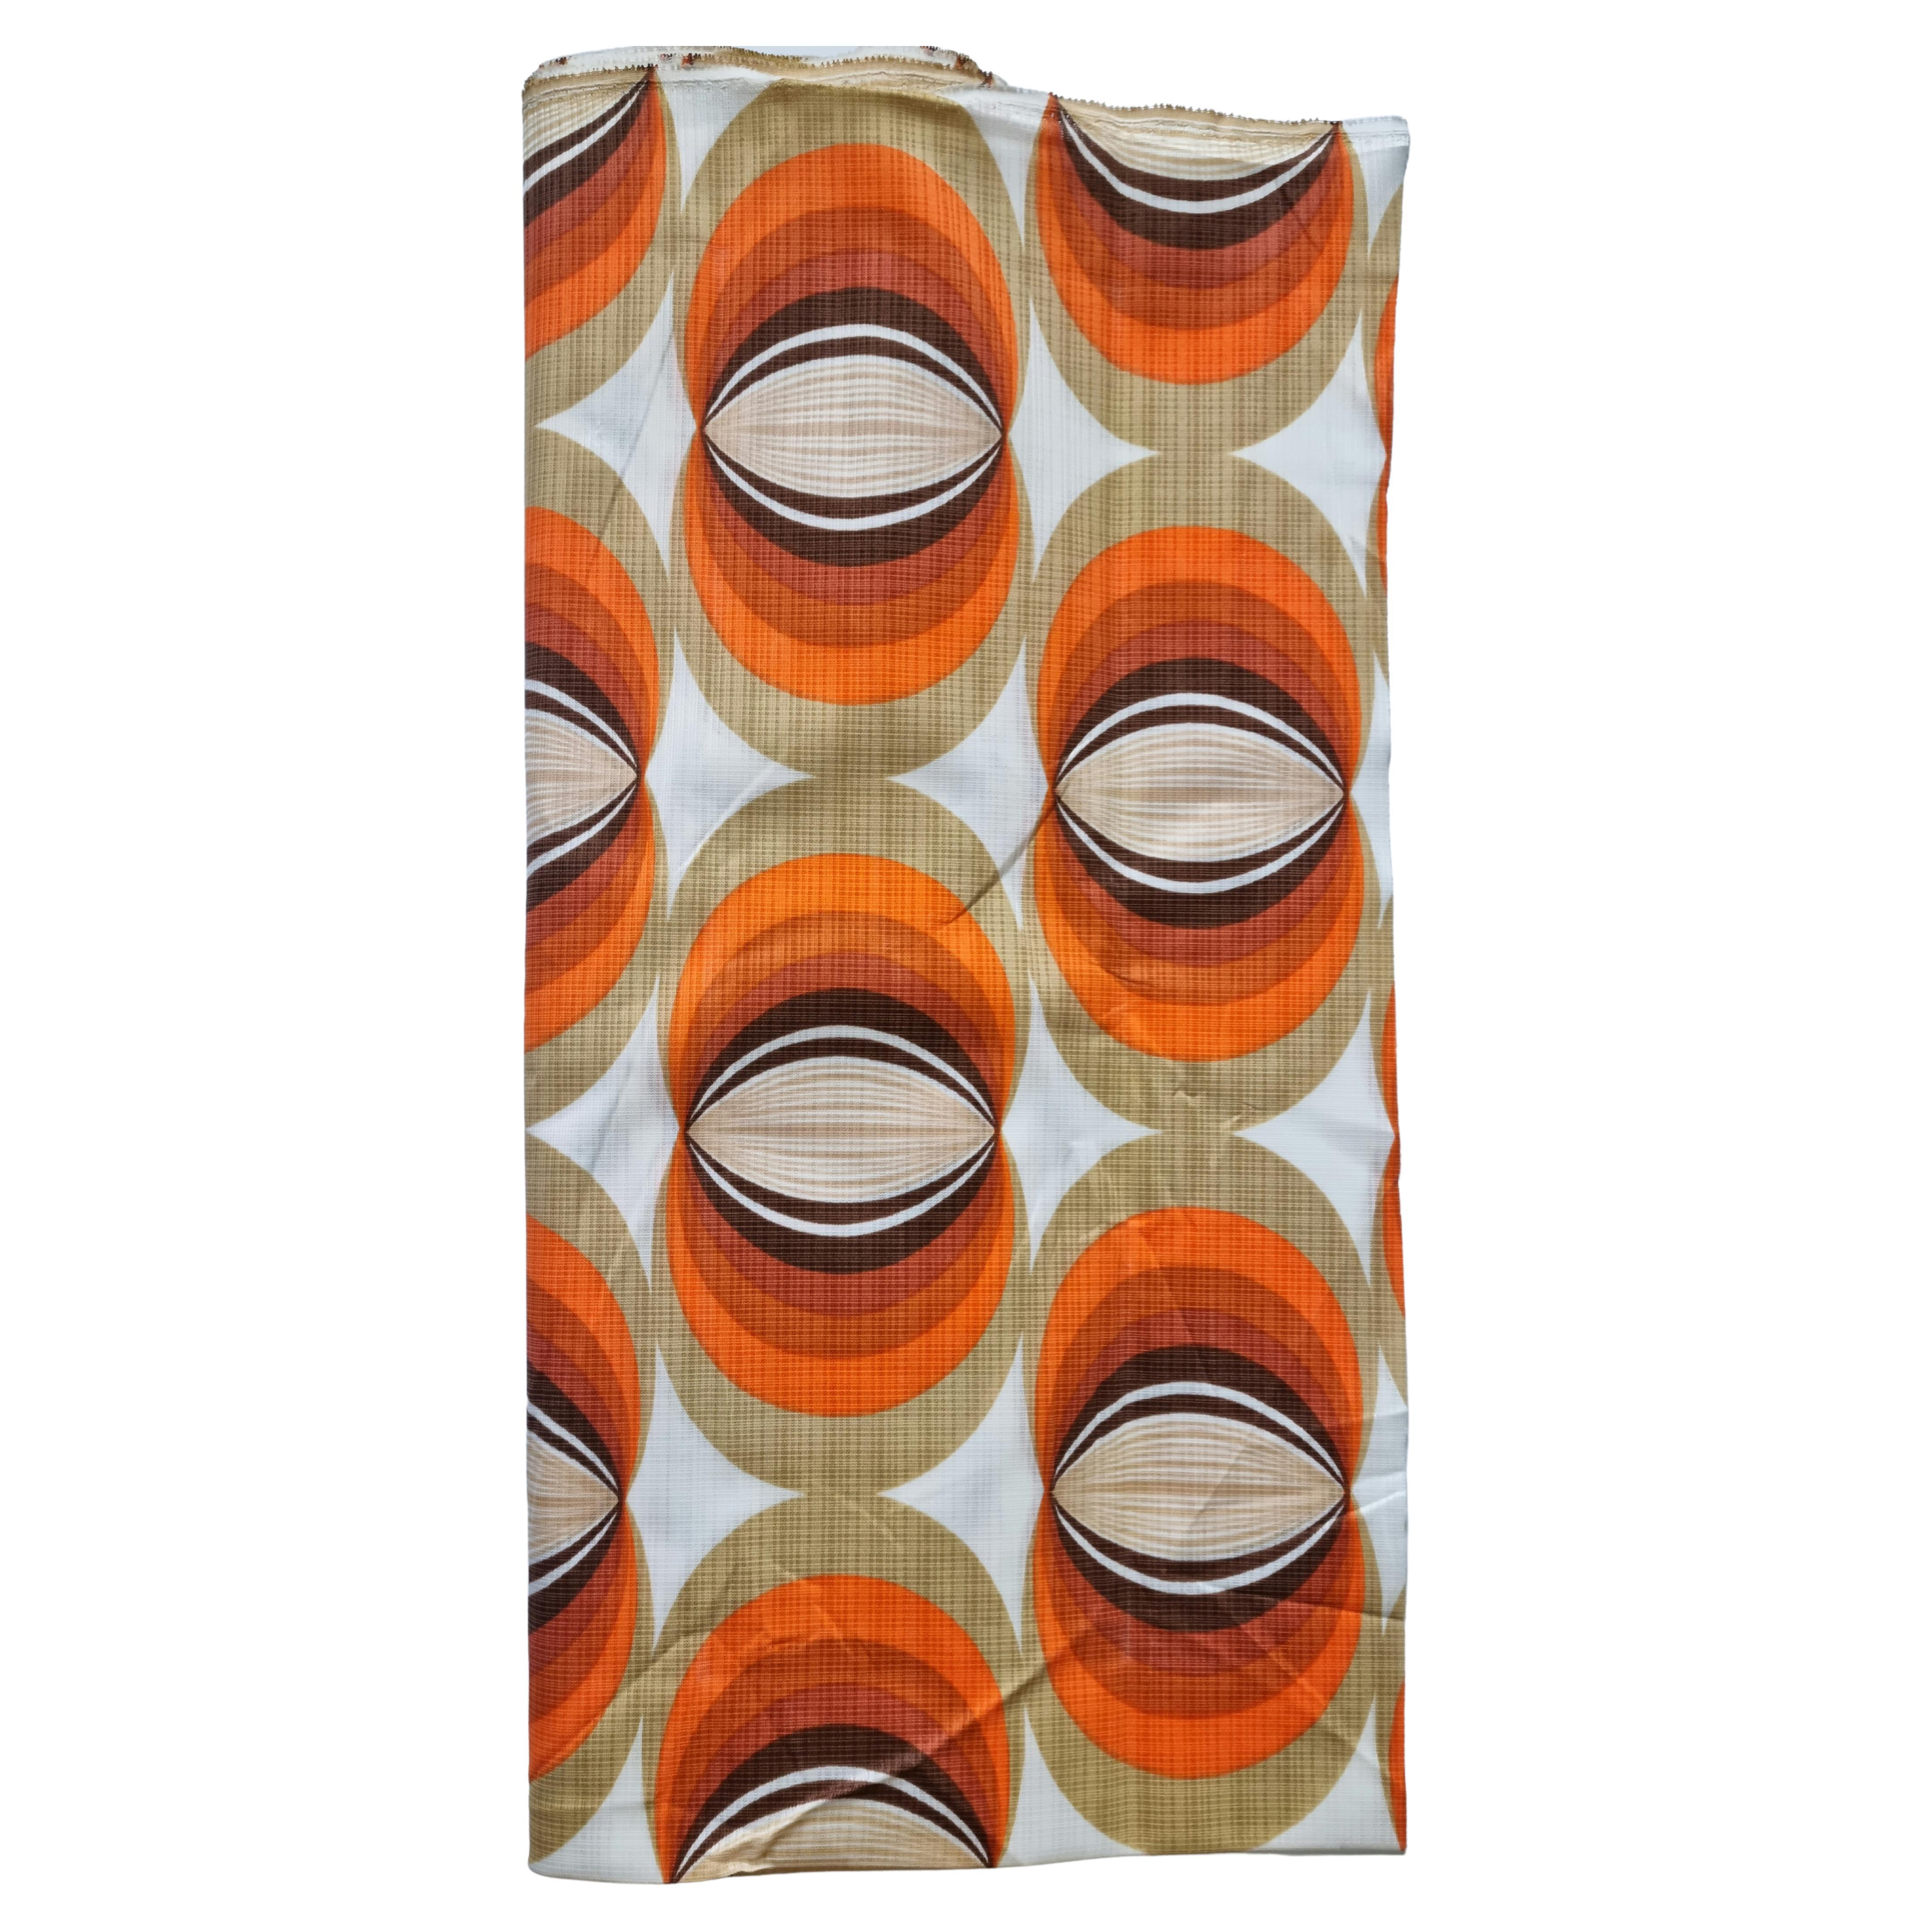 Midcentury Large Cloth, Fabric or Textile in Style of Panton Verner, 1960s For Sale